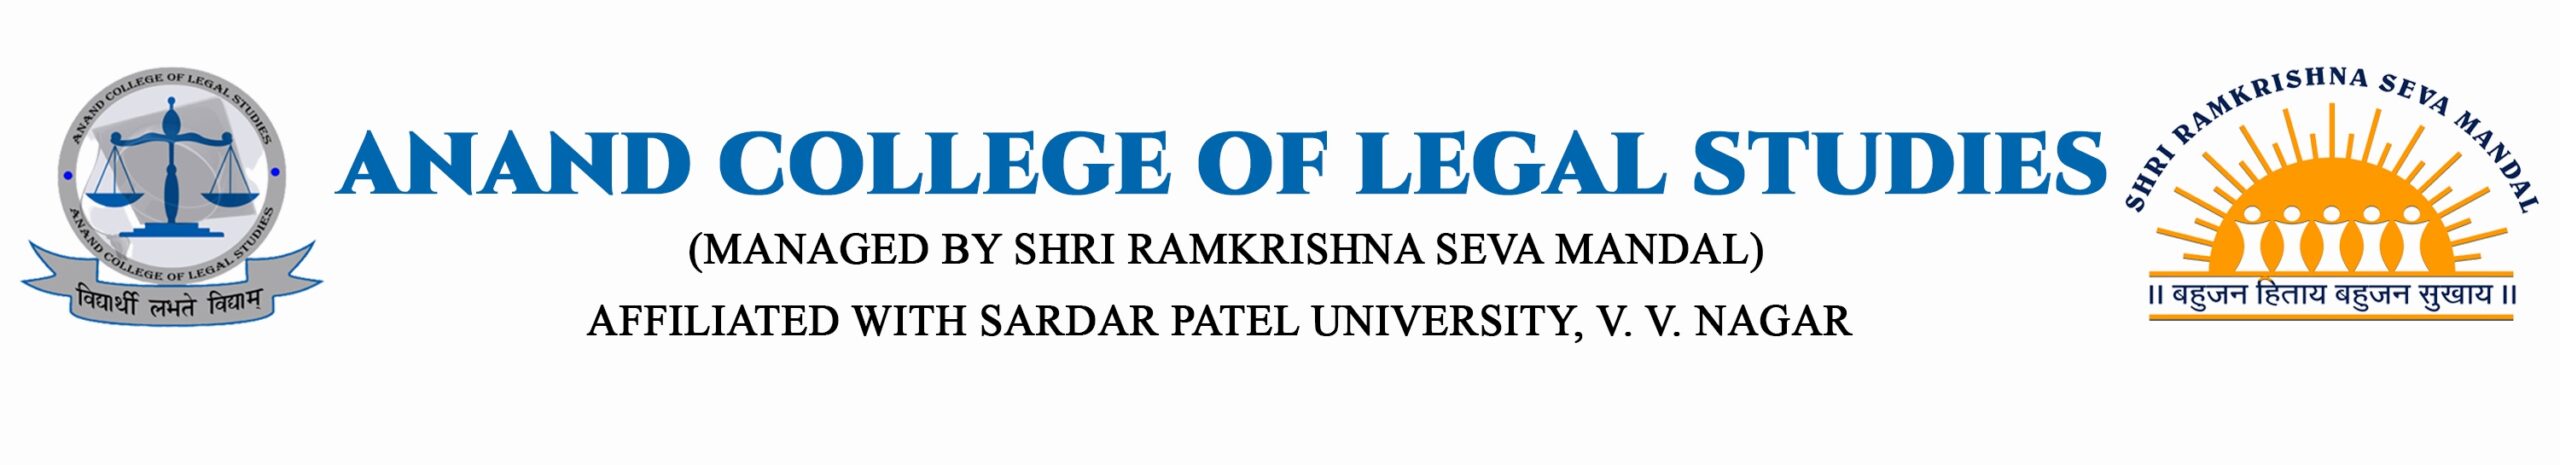 Anand College of legal Studies